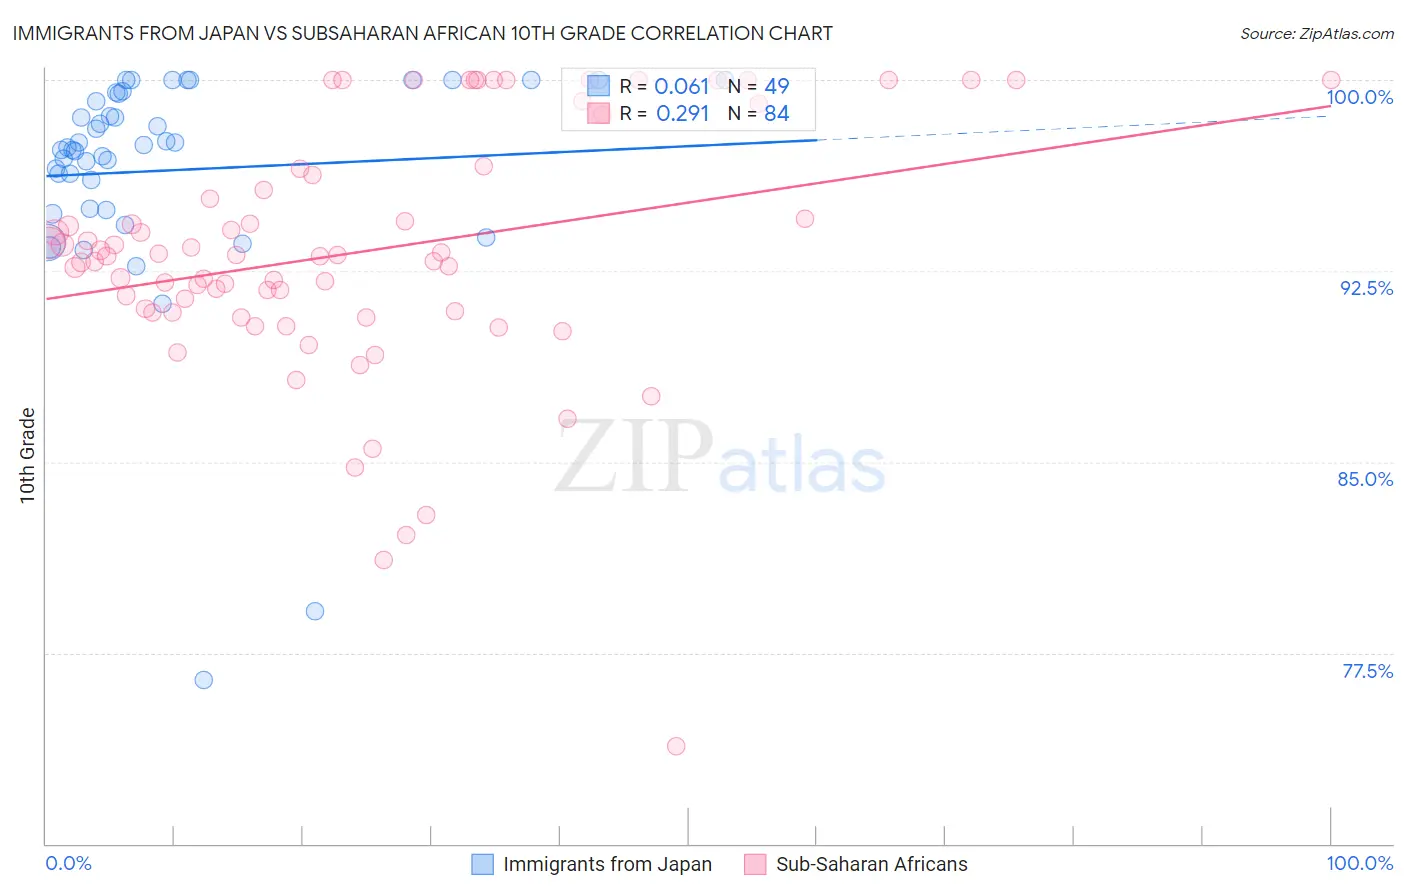 Immigrants from Japan vs Subsaharan African 10th Grade